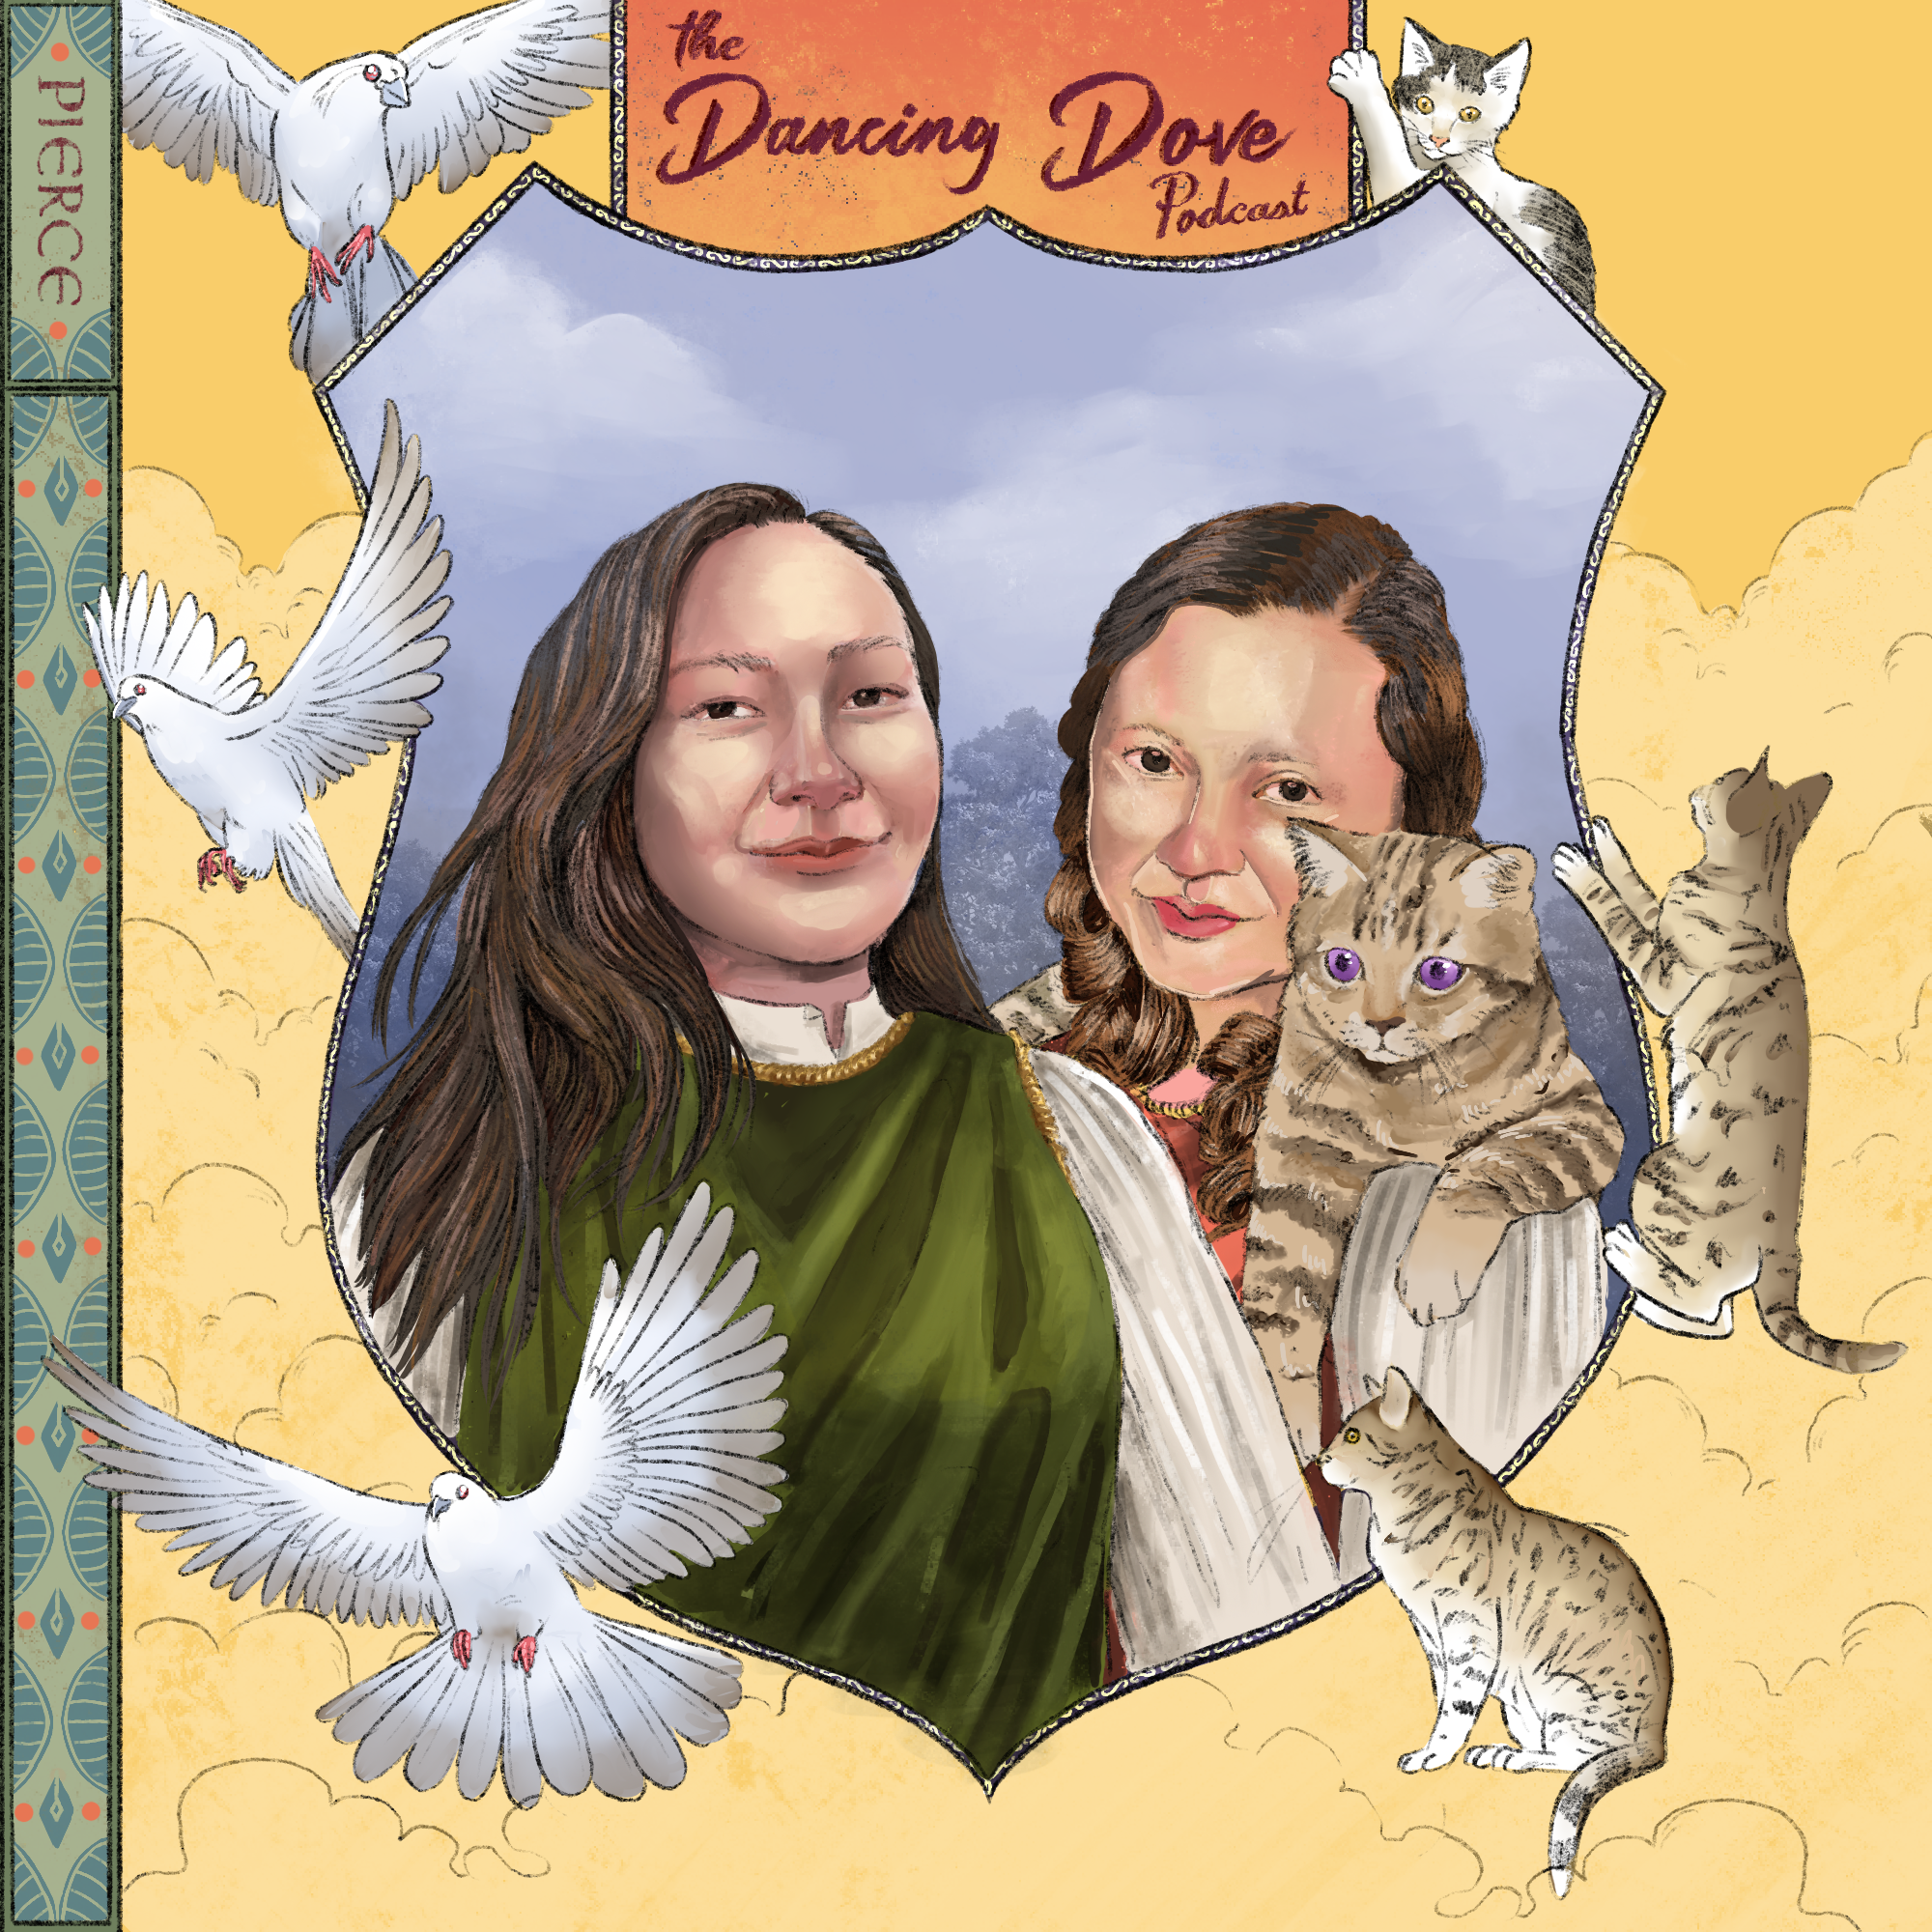 The Dancing Dove Podcast